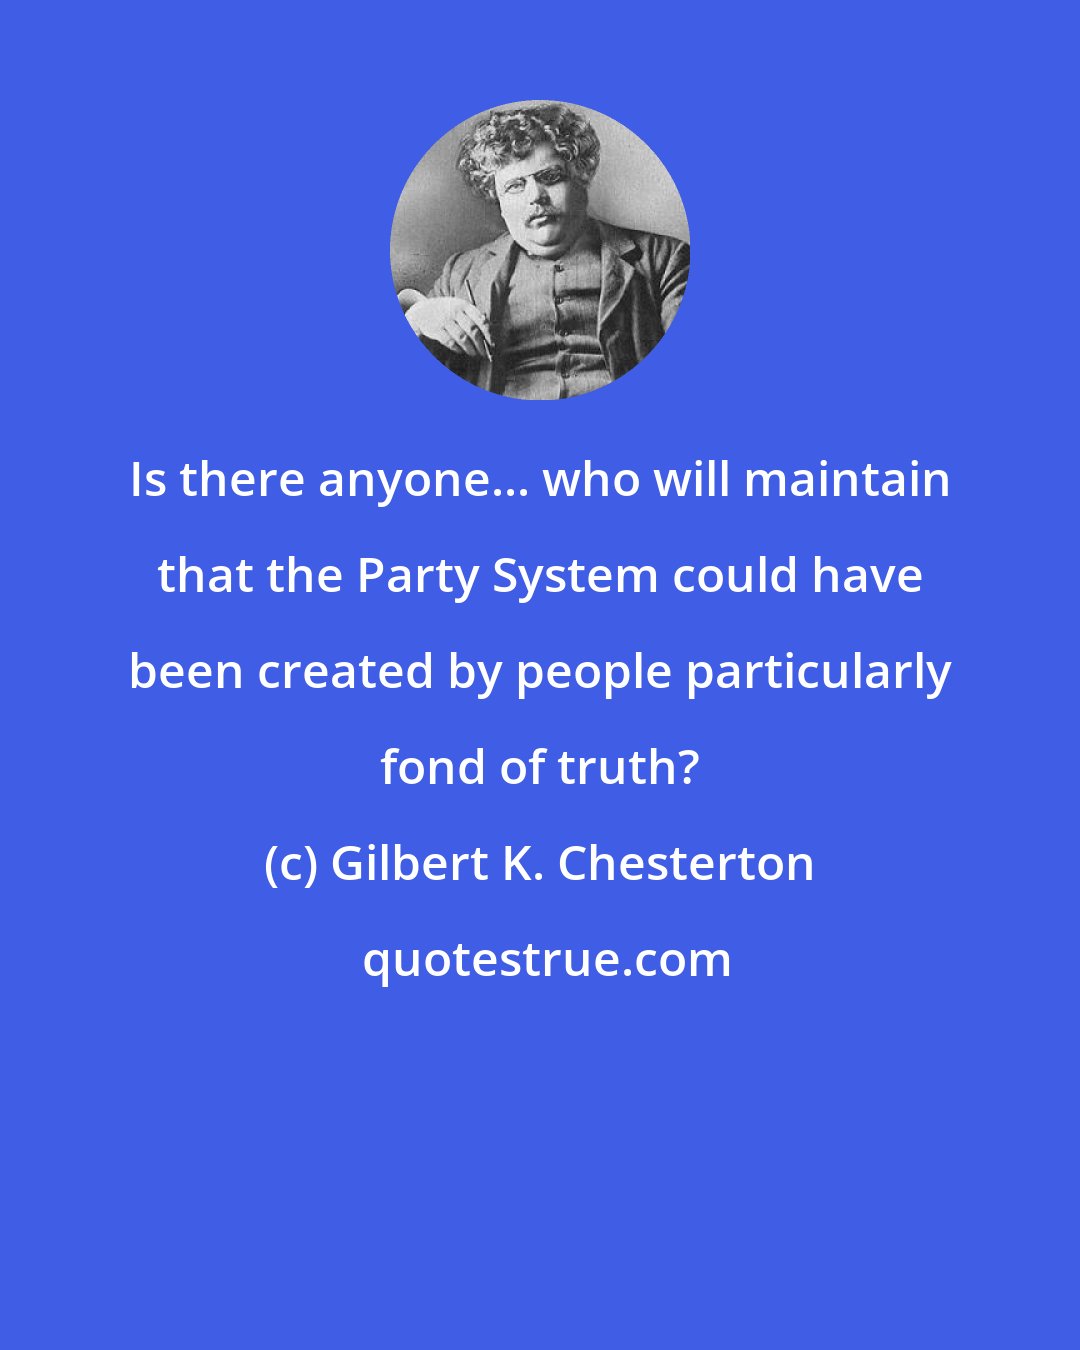 Gilbert K. Chesterton: Is there anyone... who will maintain that the Party System could have been created by people particularly fond of truth?